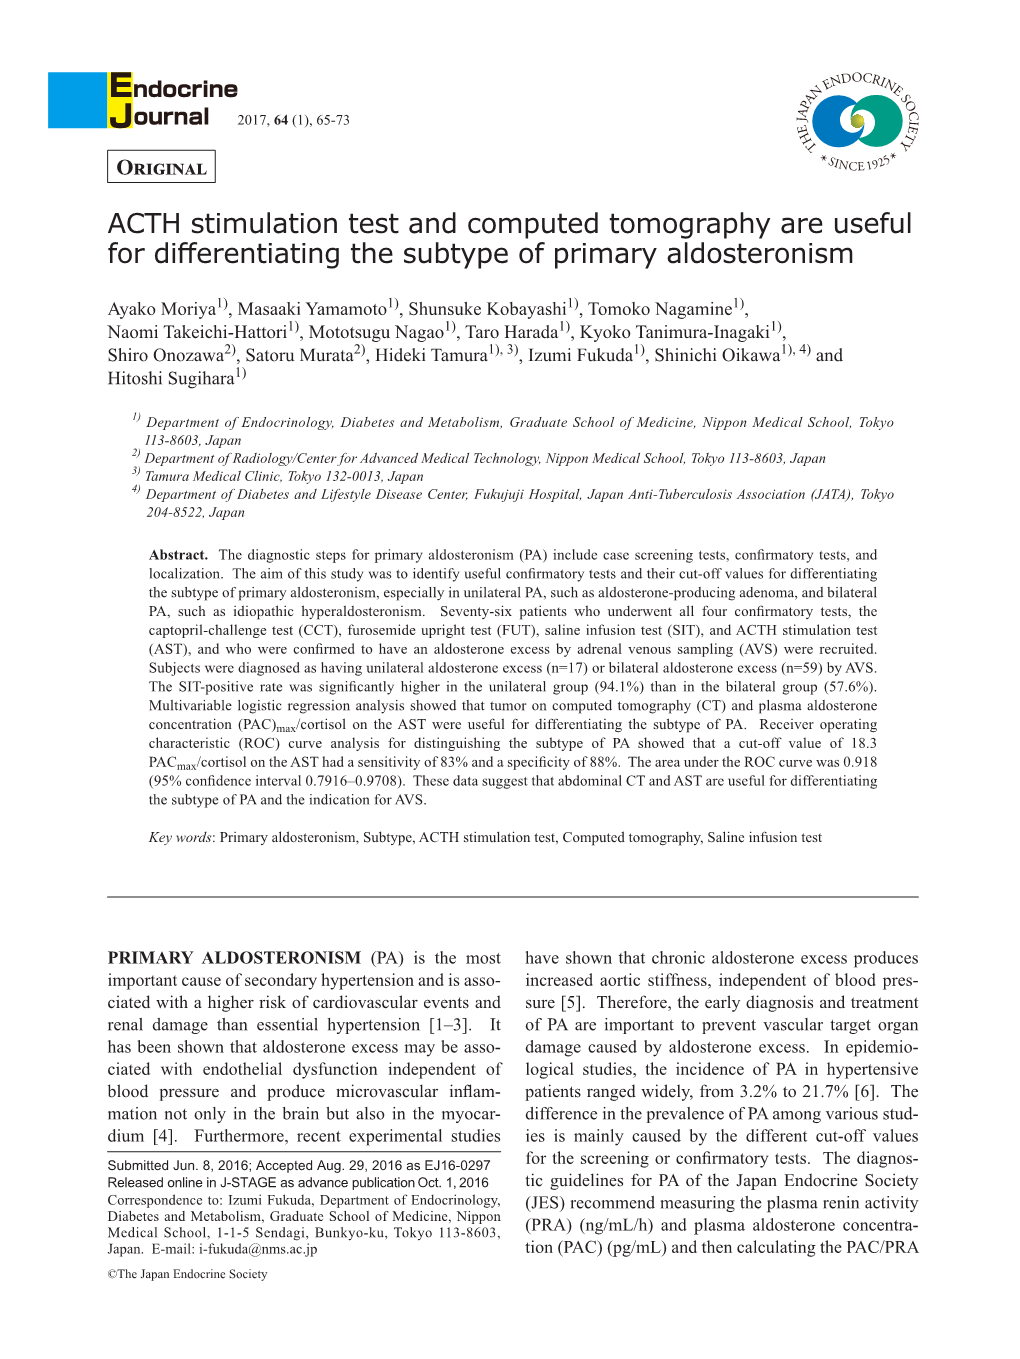 ACTH Stimulation Test and Computed Tomography Are Useful for Differentiating the Subtype of Primary Aldosteronism